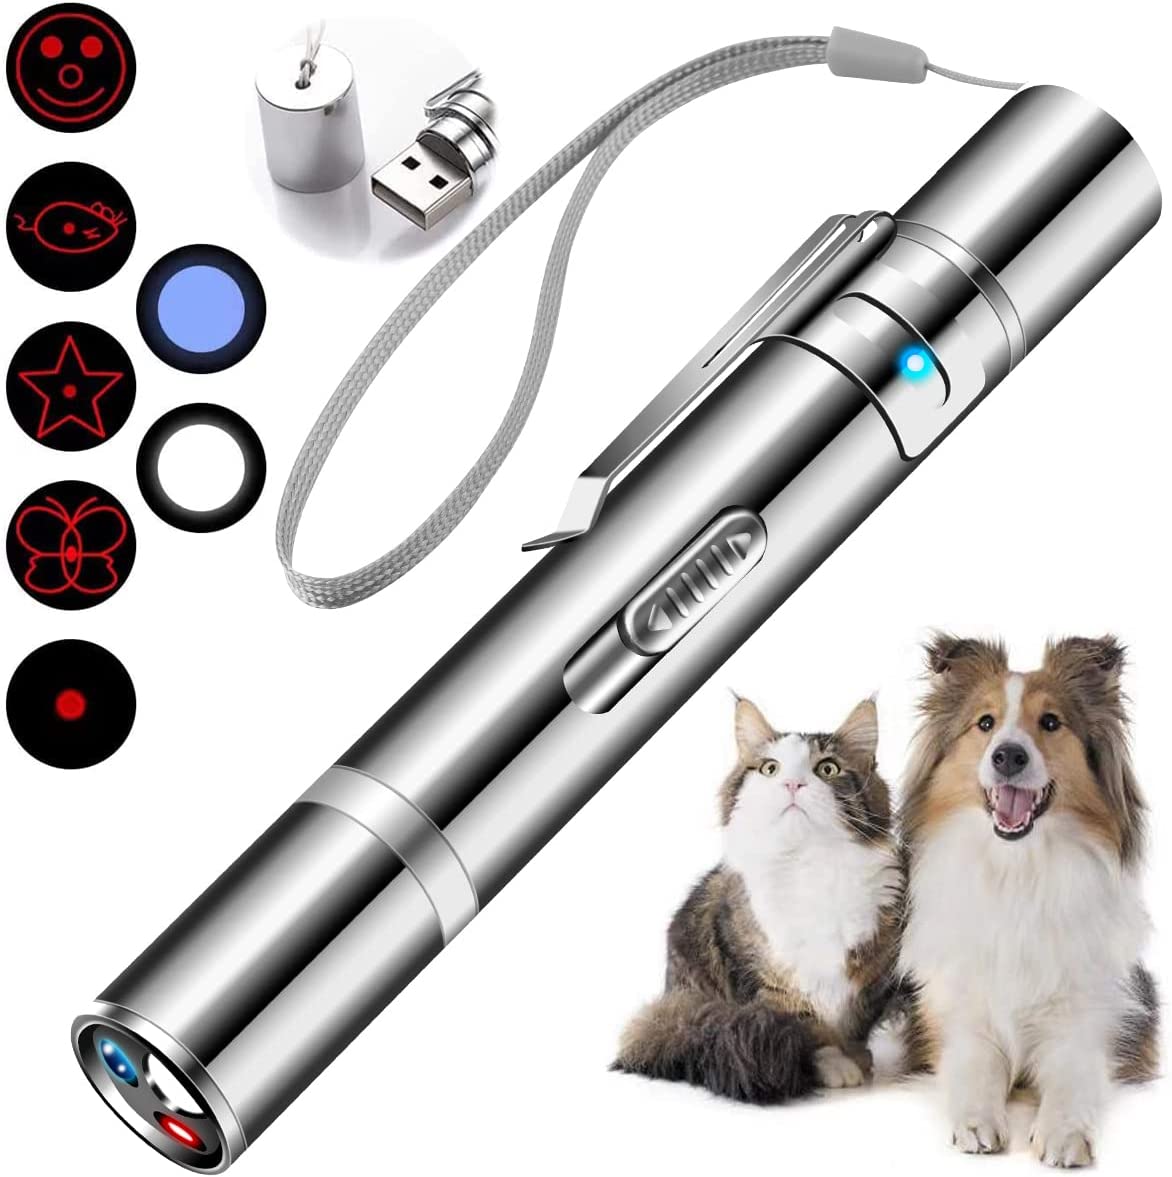 Cowjag Cat Toys, Laser Pointer with 7 Adjustable Patterns, USB Recharge Laser, Long Range and 3 Modes Training Chaser Interactive Toy, Dog Laser Pen Toy